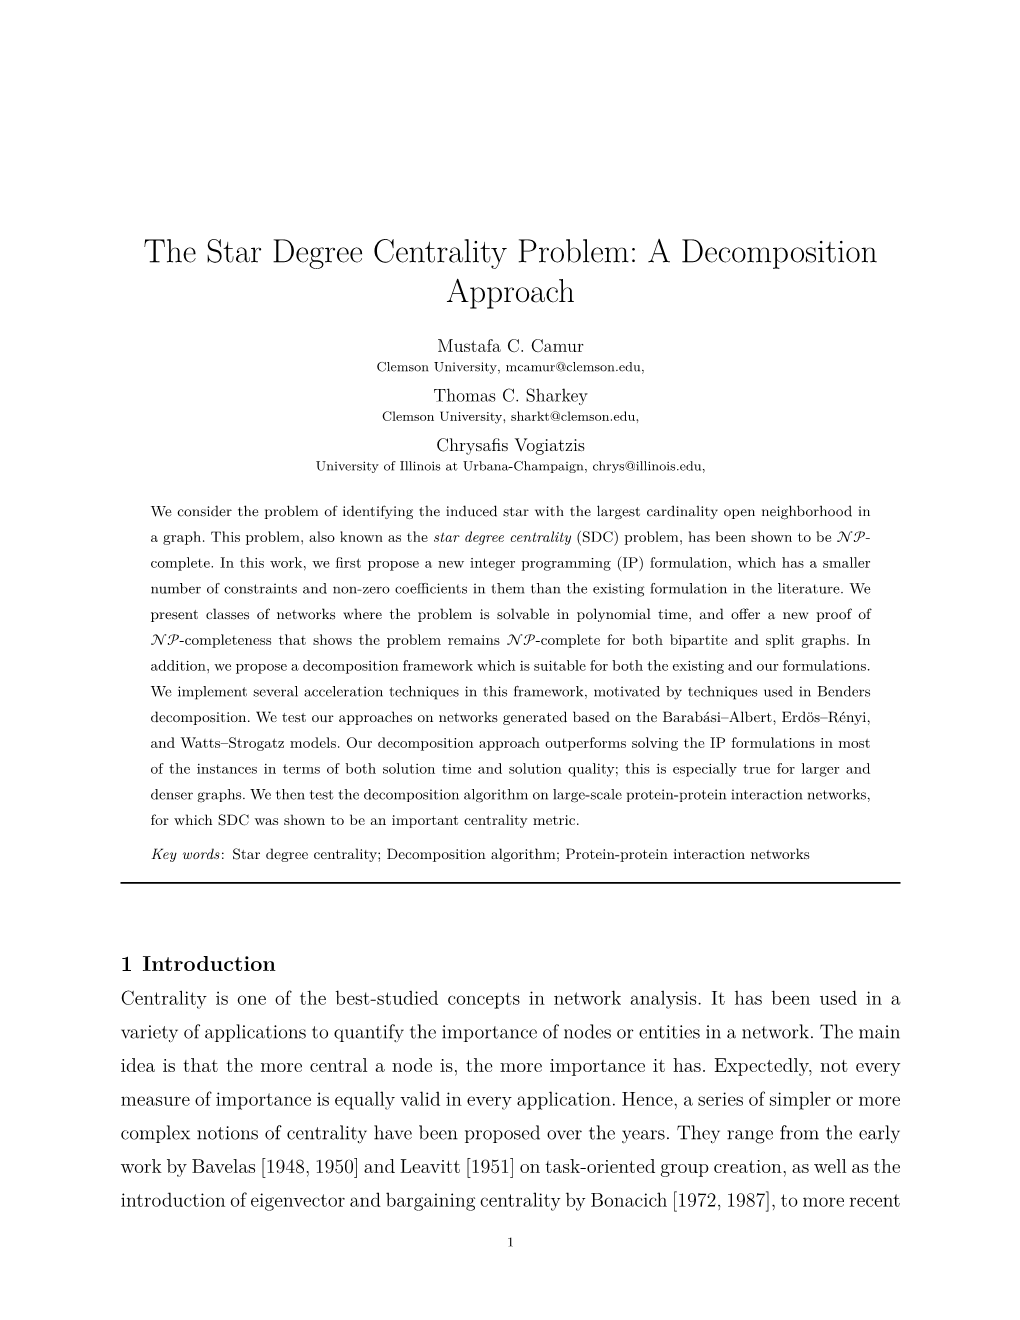 The Star Degree Centrality Problem: a Decomposition Approach